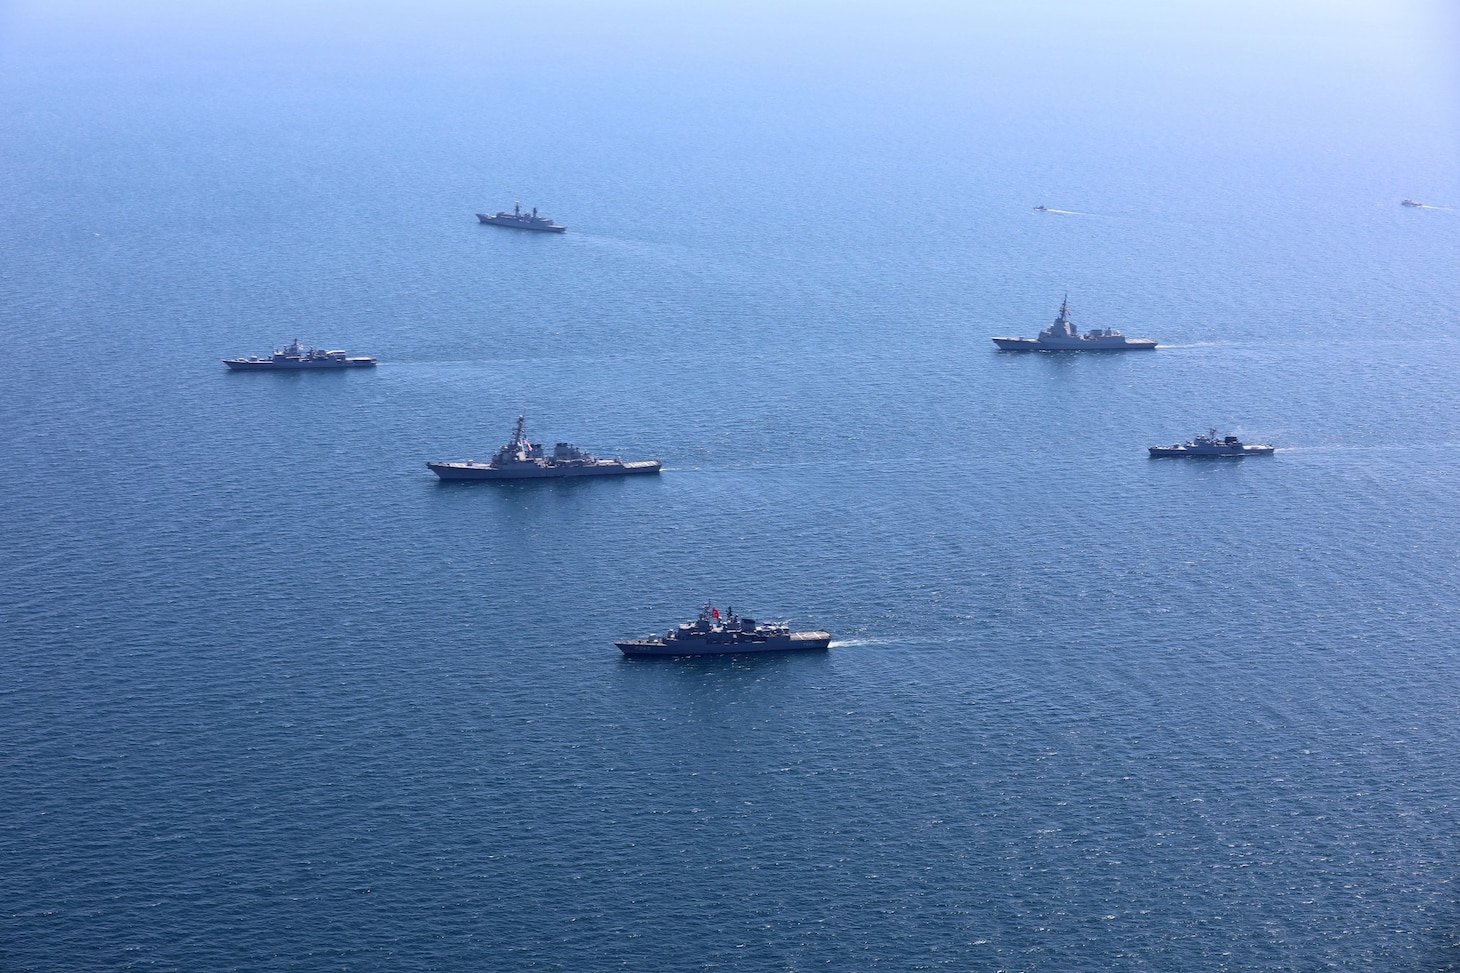 200724-O-NO901-0003 BLACK SEA (July 24, 2020) Ships and aircraft from eight nations sail in formation during a photo exercise while participating in exercise Sea Breeze 2020 in the Black Sea, July 24, 2020. Sea Breeze is an annual U.S.-Ukrainian co-hosted exercise designed to enhance interoperability between participating nations and strengthen regional security. (Photo courtesy of Ukraine Navy)